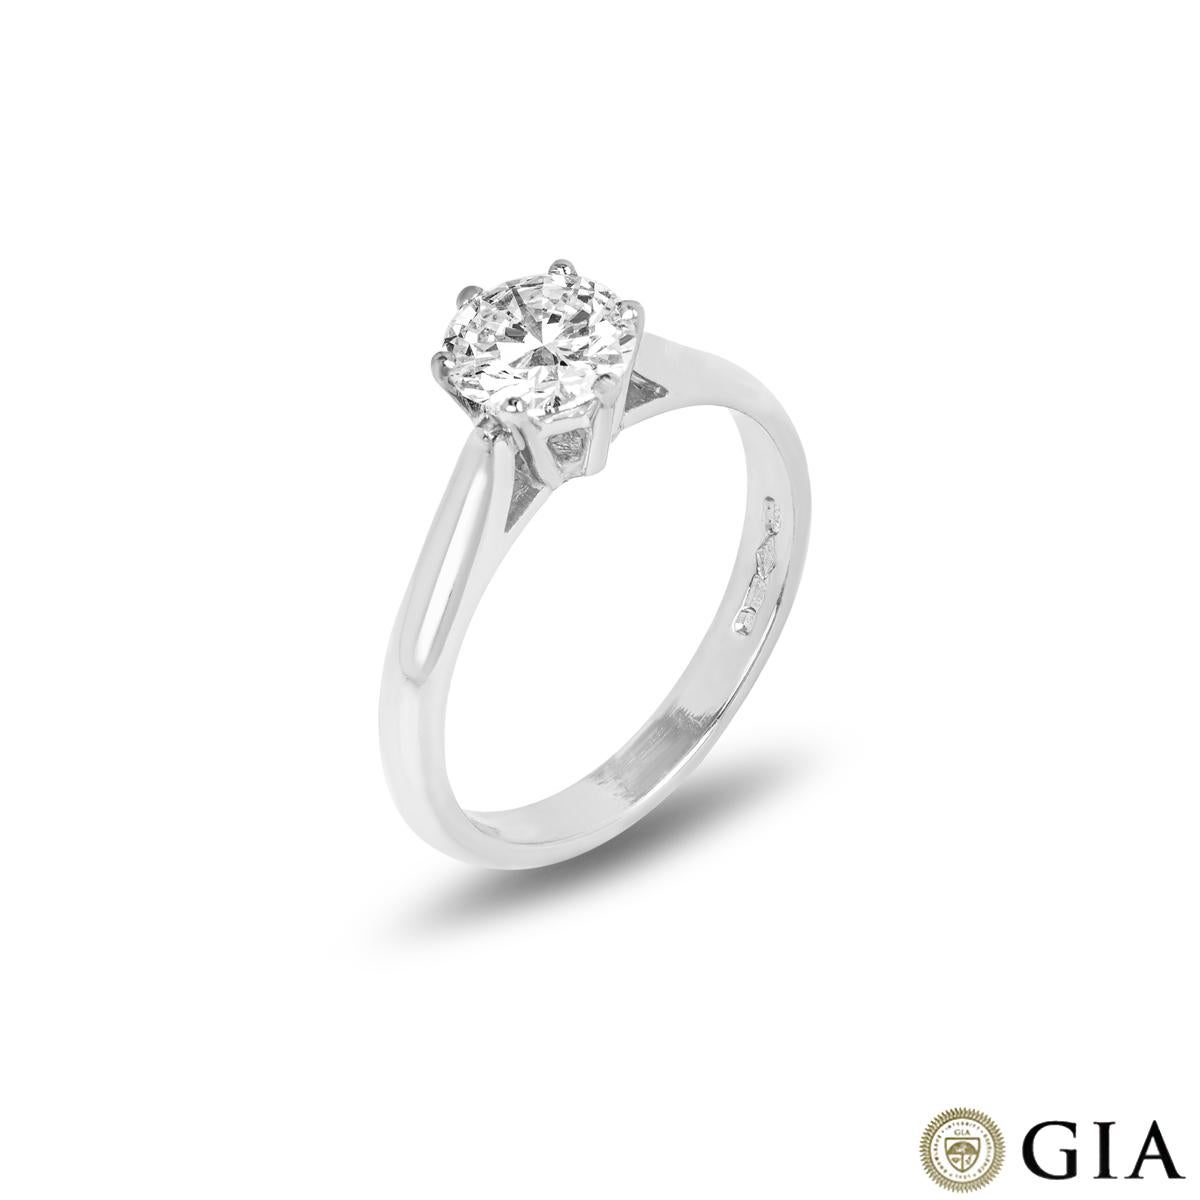 A gorgeous platinum diamond solitaire ring. The engagement ring features a round brilliant cut diamond set in a six prong mount weighing 1.00ct, D colour and IF clarity (internally flawless). The ring has a gross weight of 4.71 grams and is